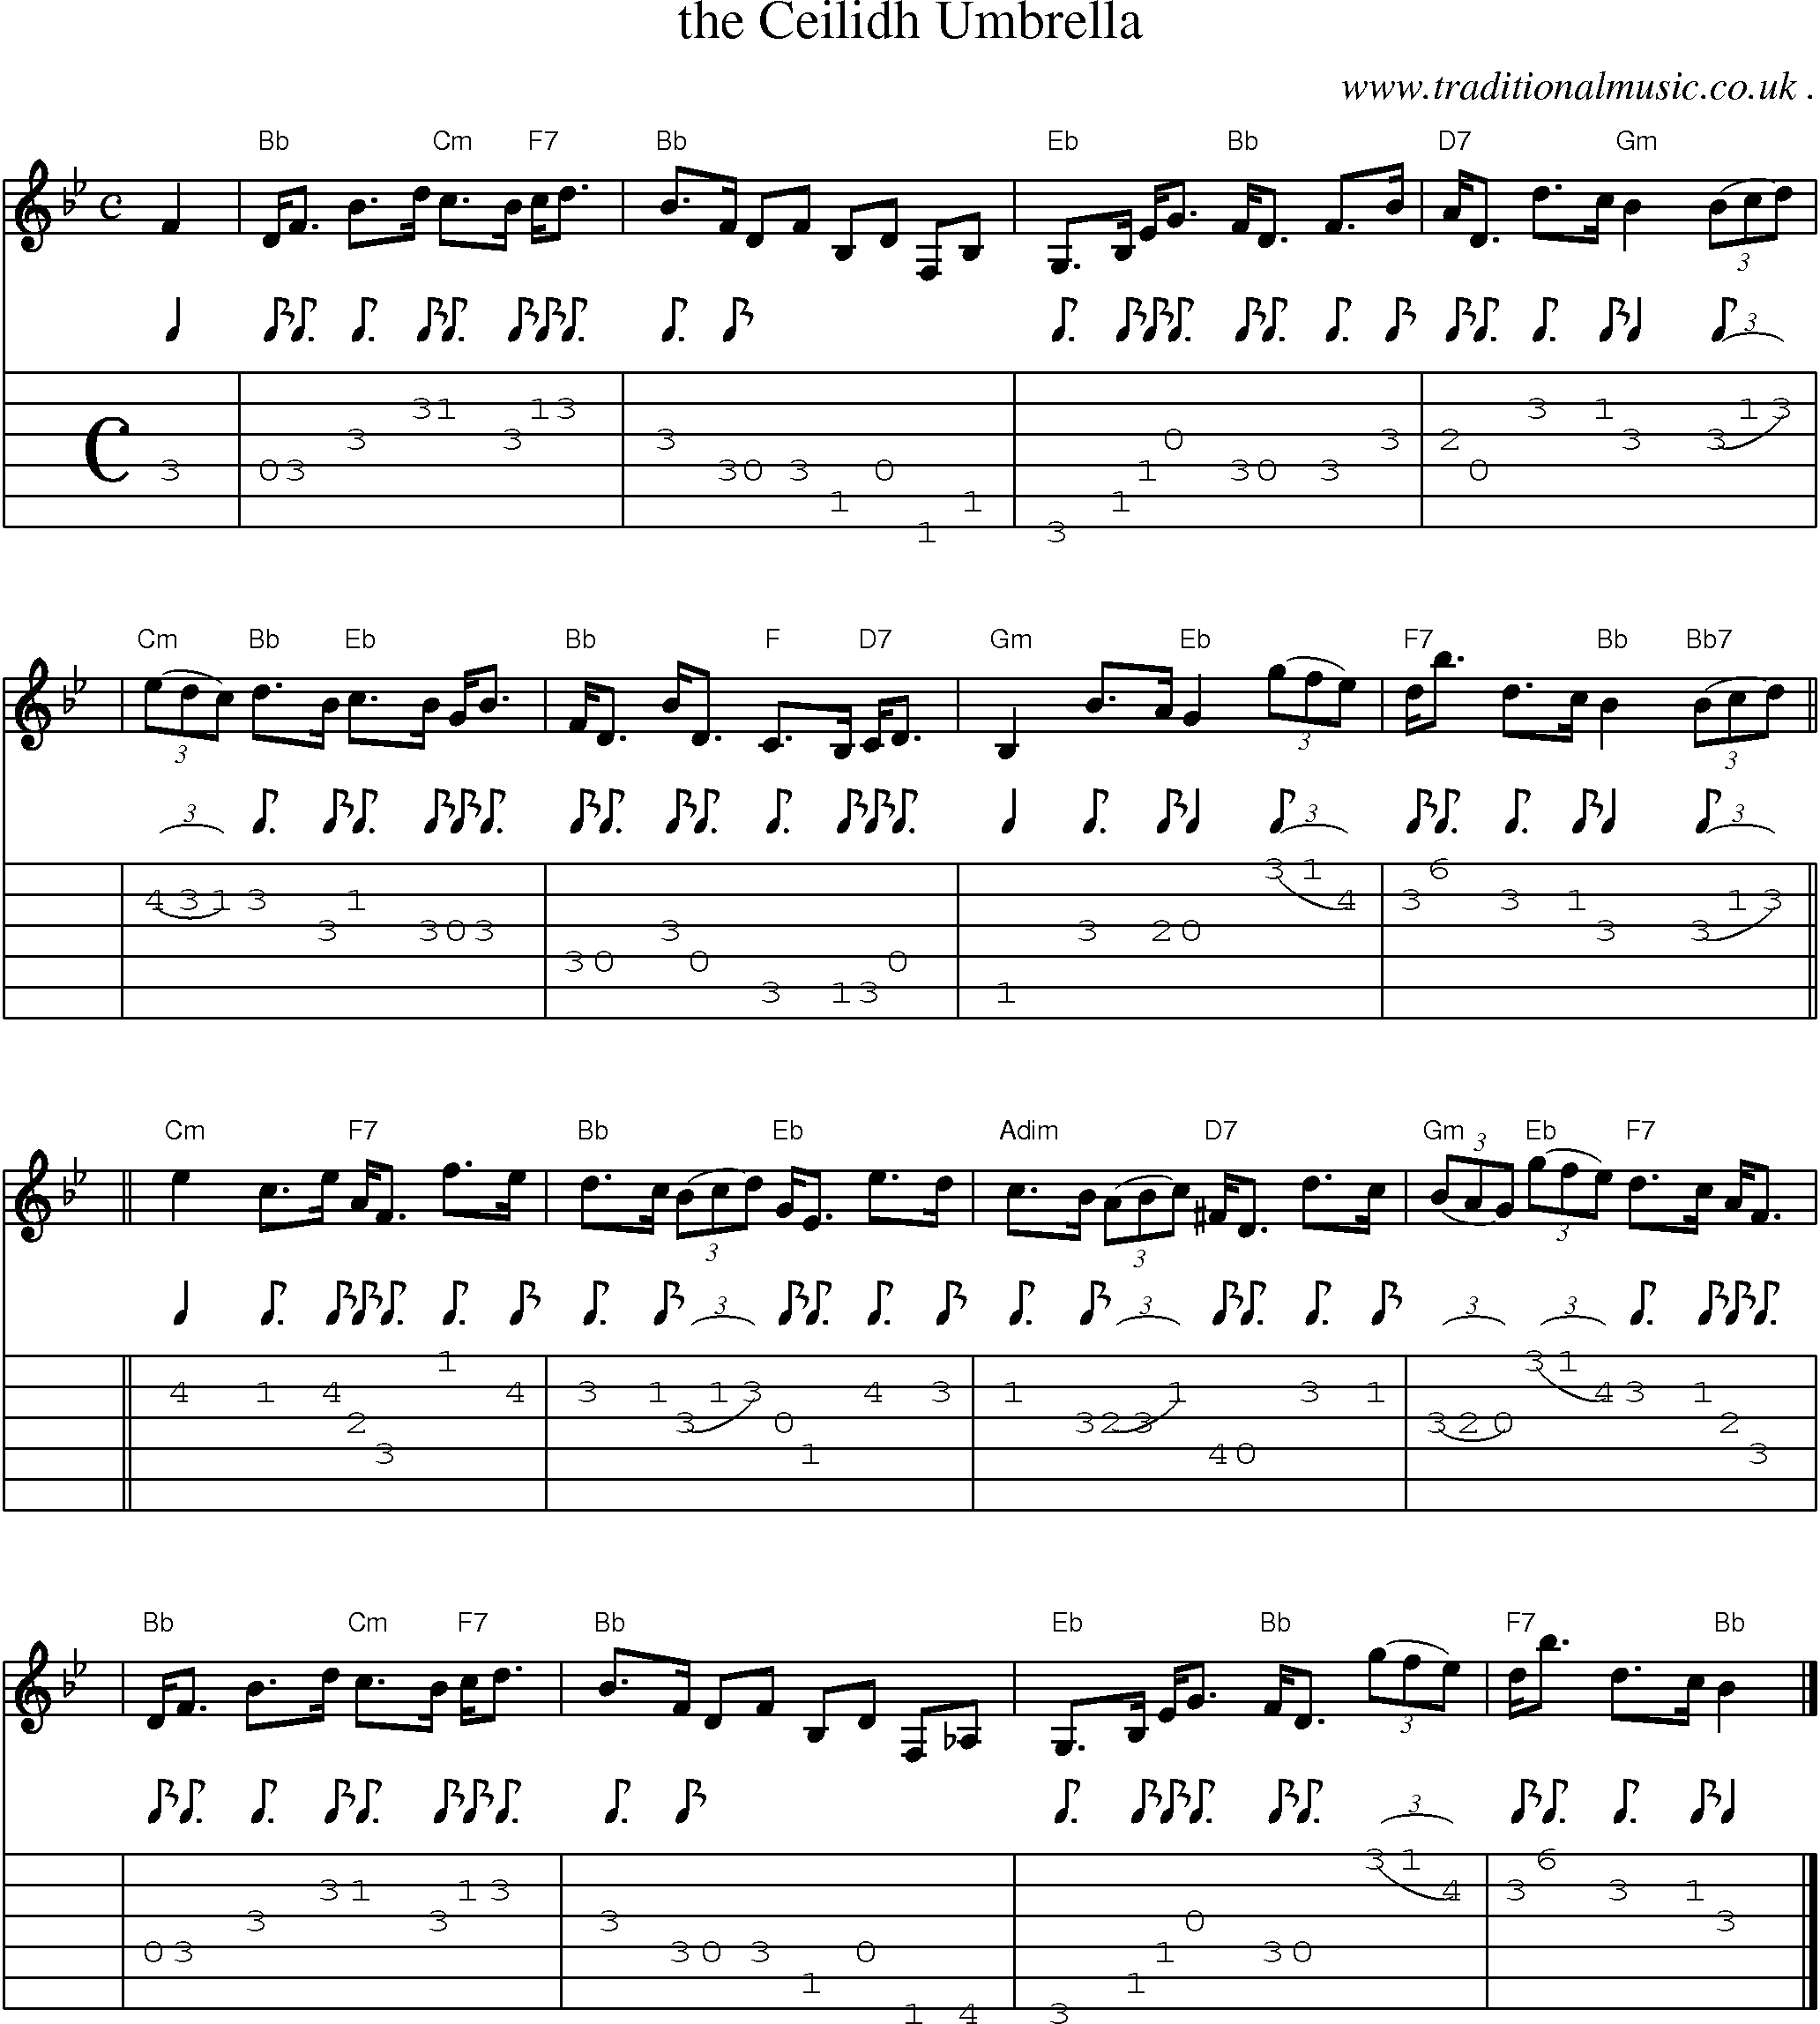 Sheet-music  score, Chords and Guitar Tabs for The Ceilidh Umbrella